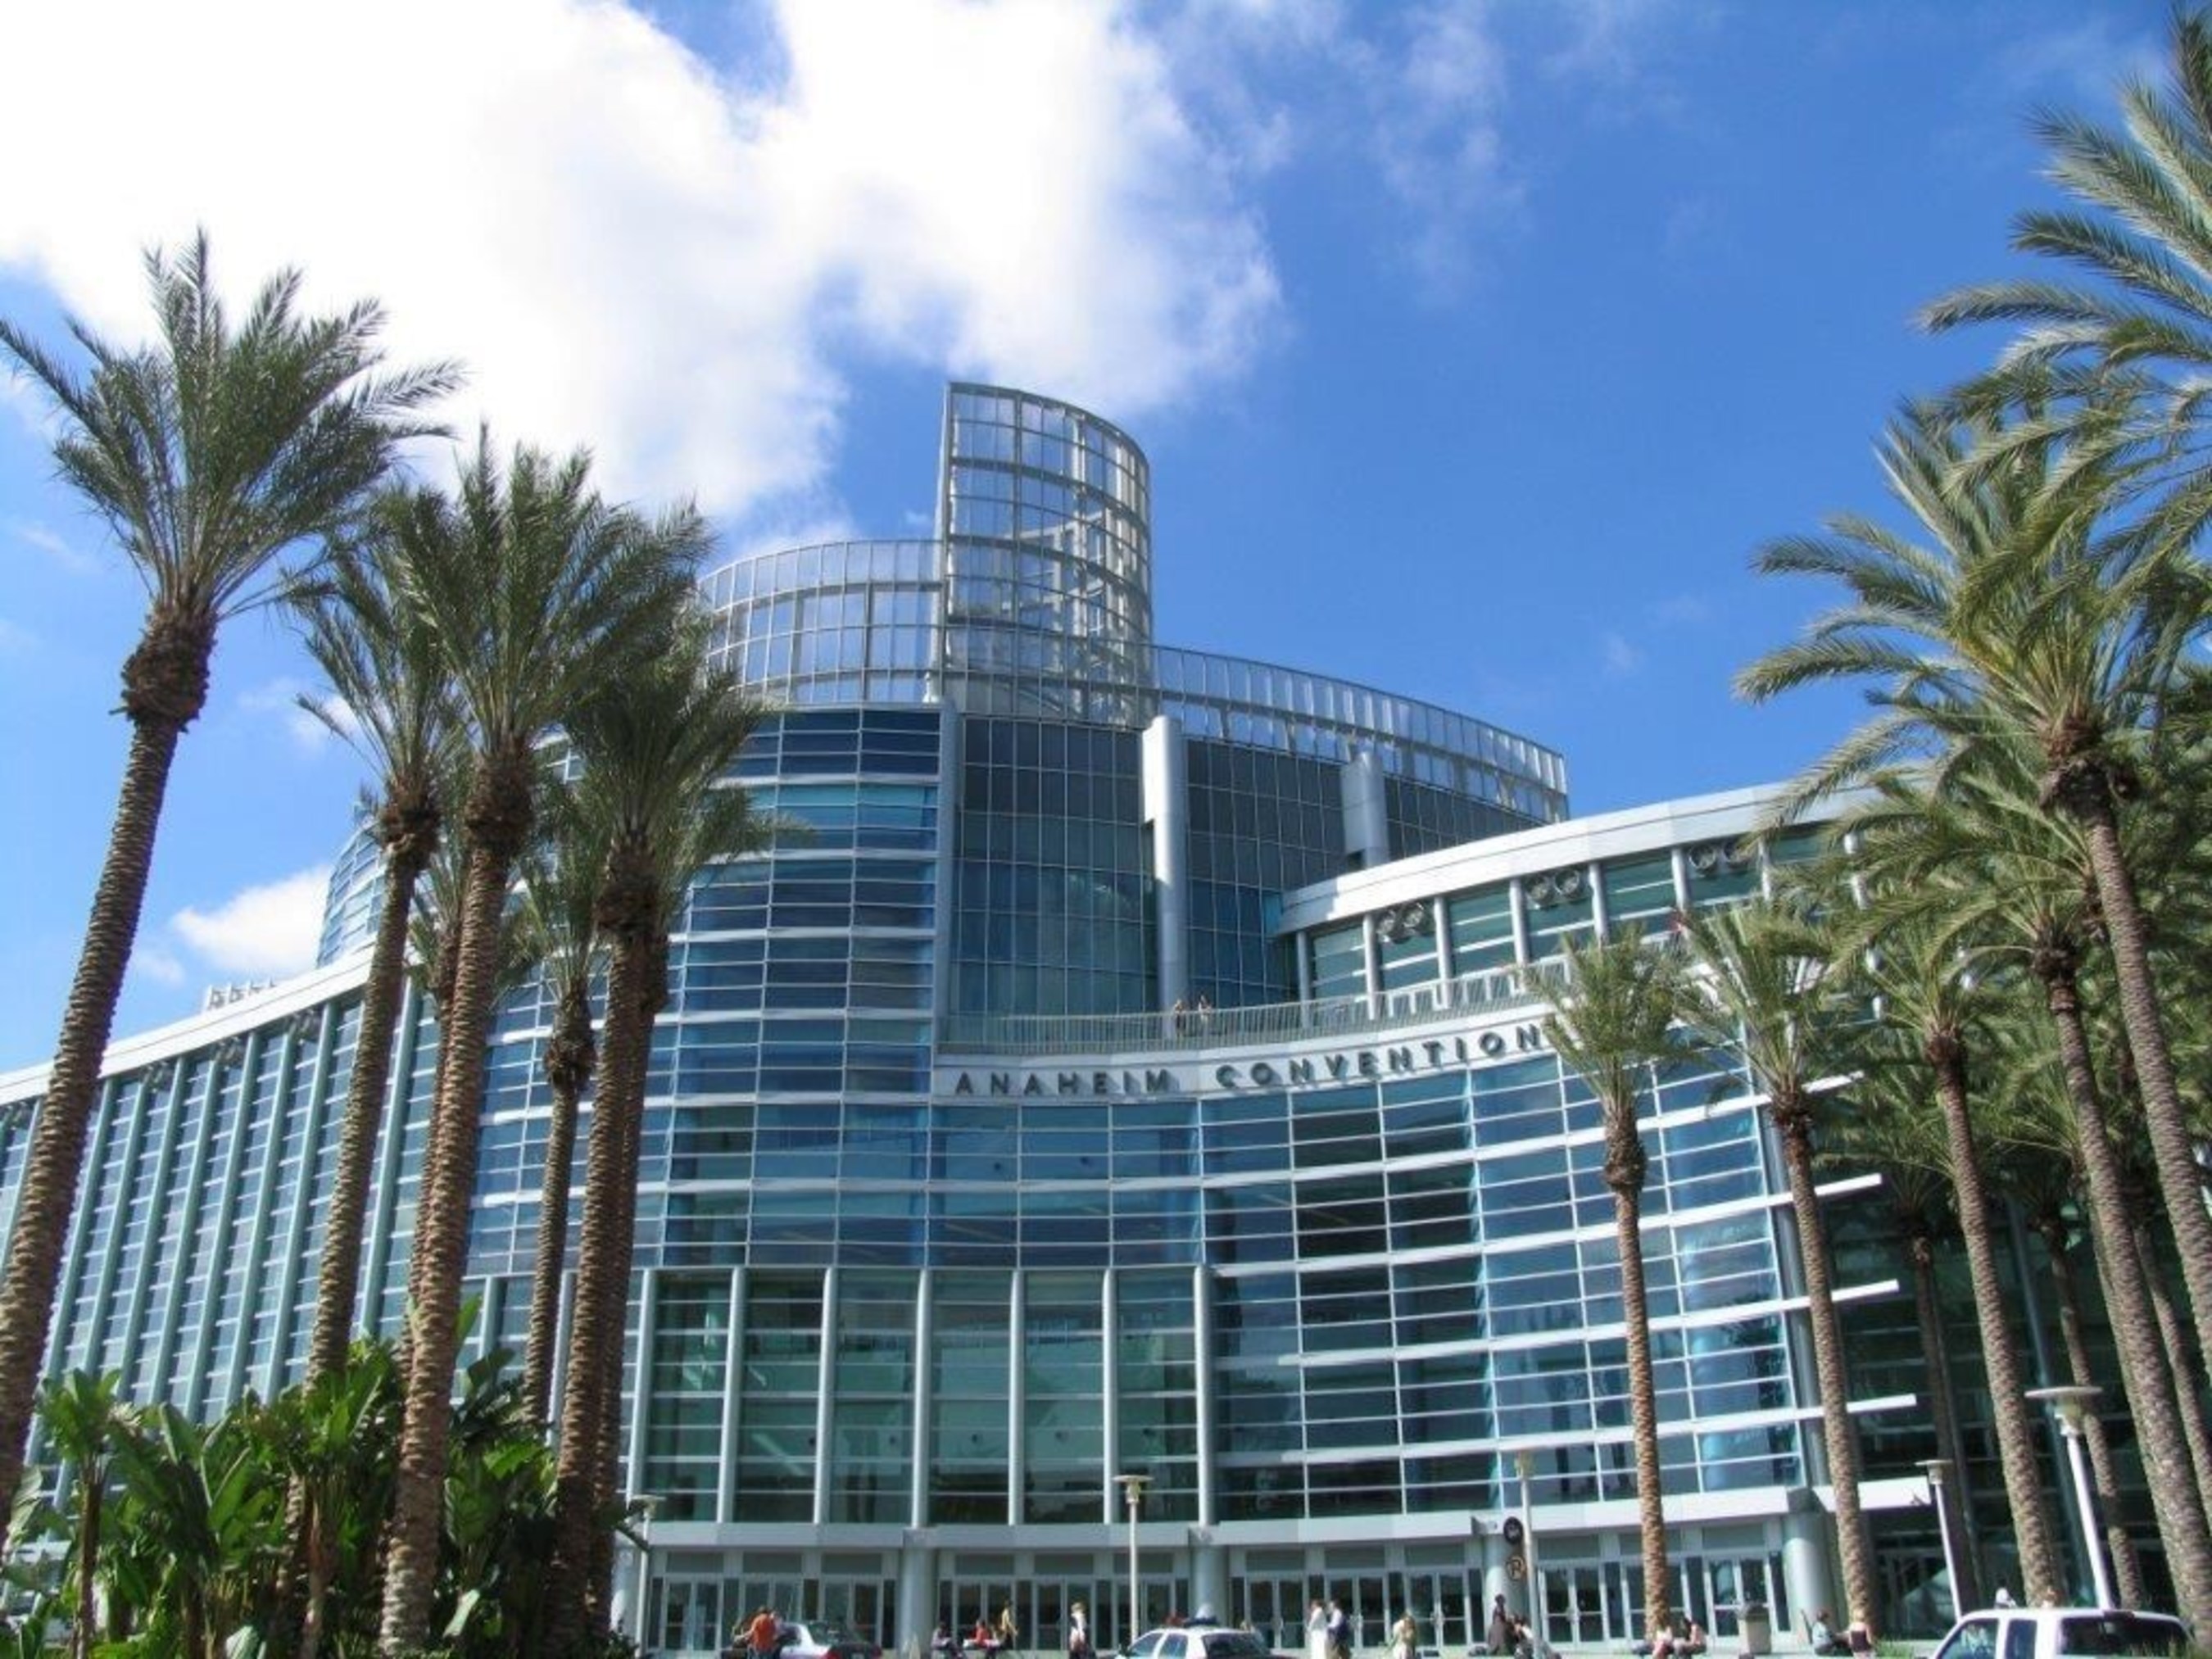 MD&M West Celebrates 30th Anniversary February 10-12, 2015 at the Anaheim Convention Center in Anaheim, CA